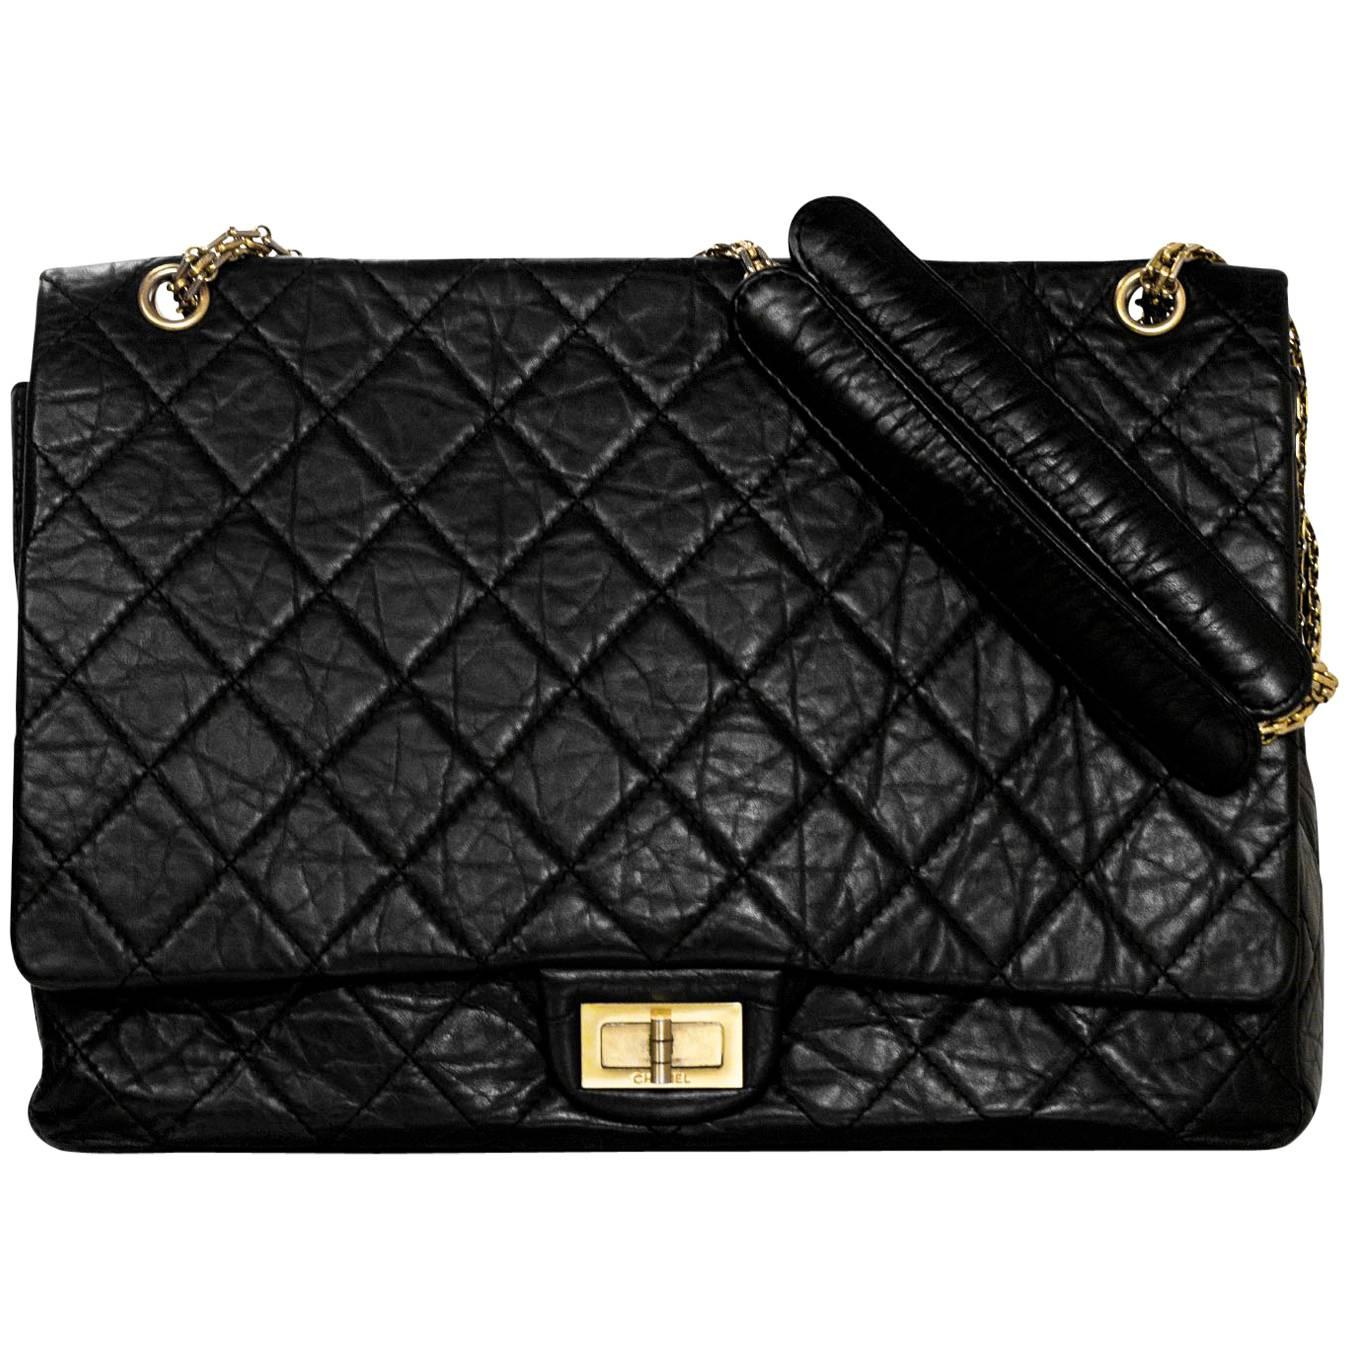 Chanel Black Distressed Calfskin Leather XL Reissue 2.55 Quilted Flap Bag